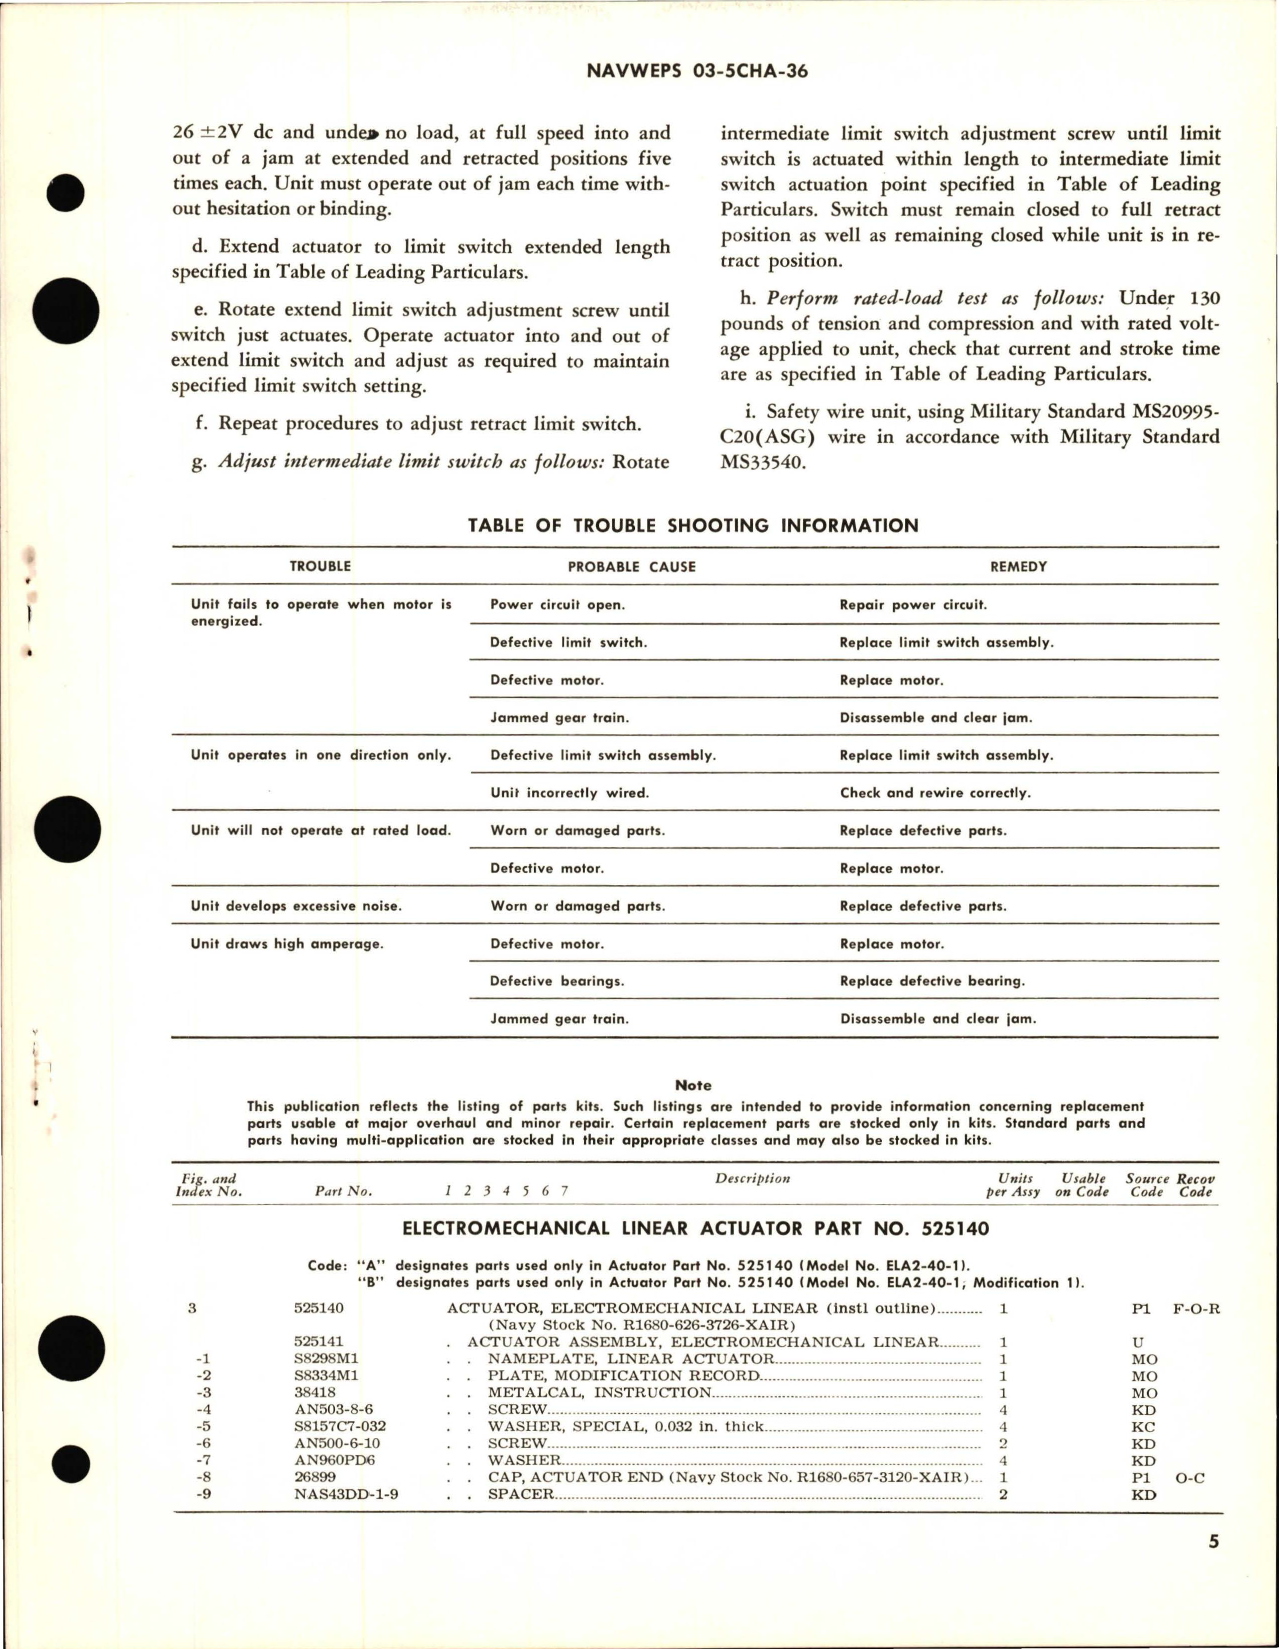 Sample page 5 from AirCorps Library document: Overhaul Instructions with Parts Breakdown for Electromechanical Linear Actuator - Part 525140 